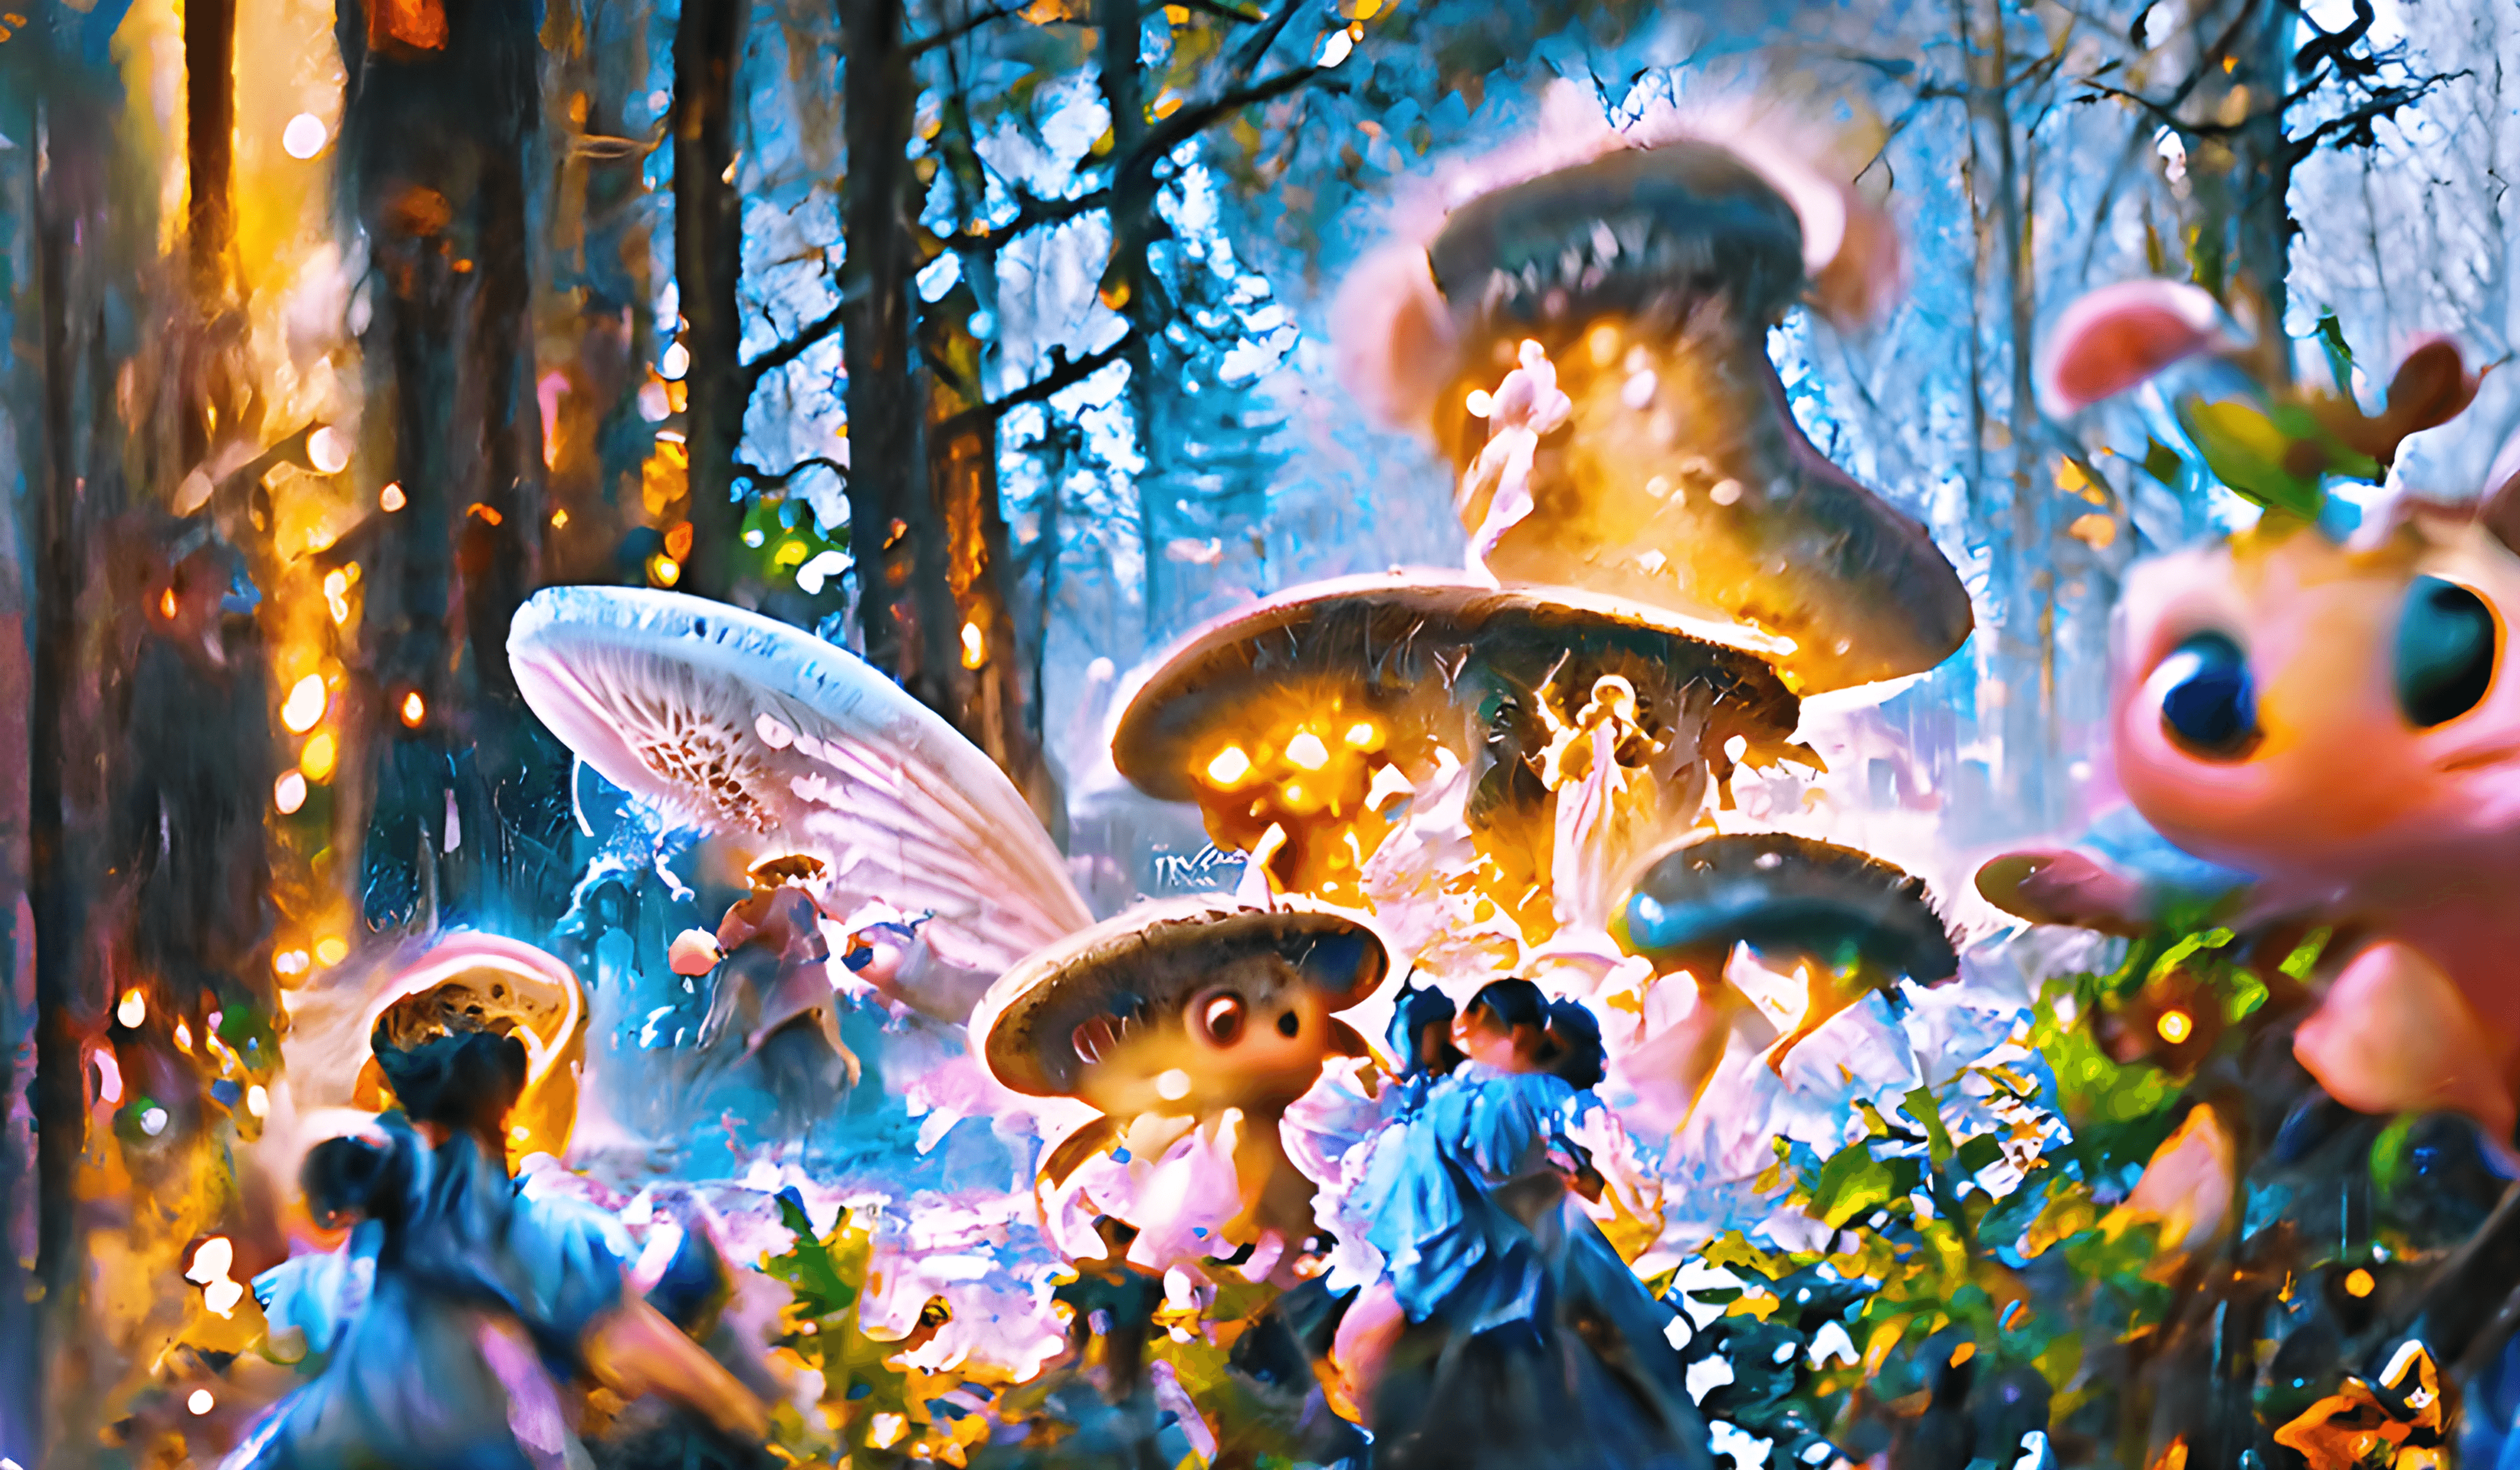 CWO#0007: Fairies in the Mushroom Forest